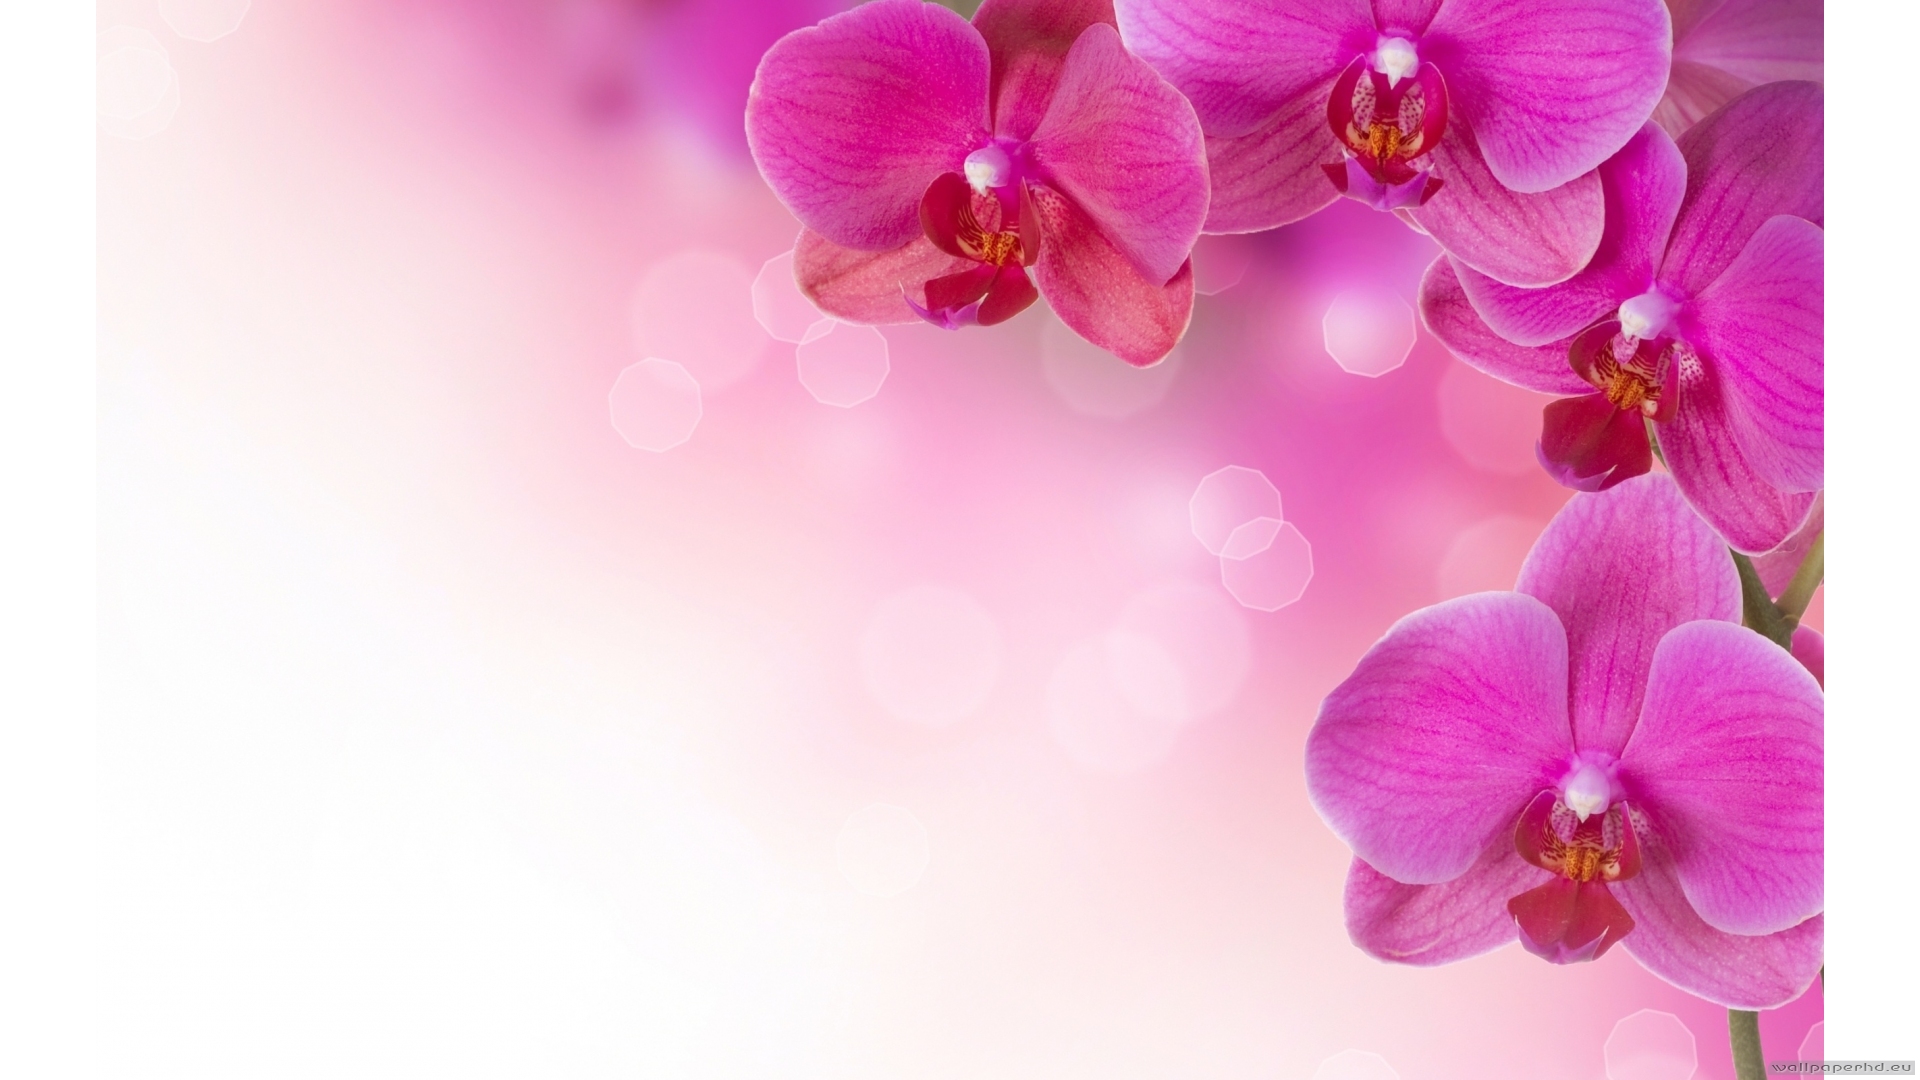 500 Orchid Pictures  Download Free Images  Stock Photos on Unsplash